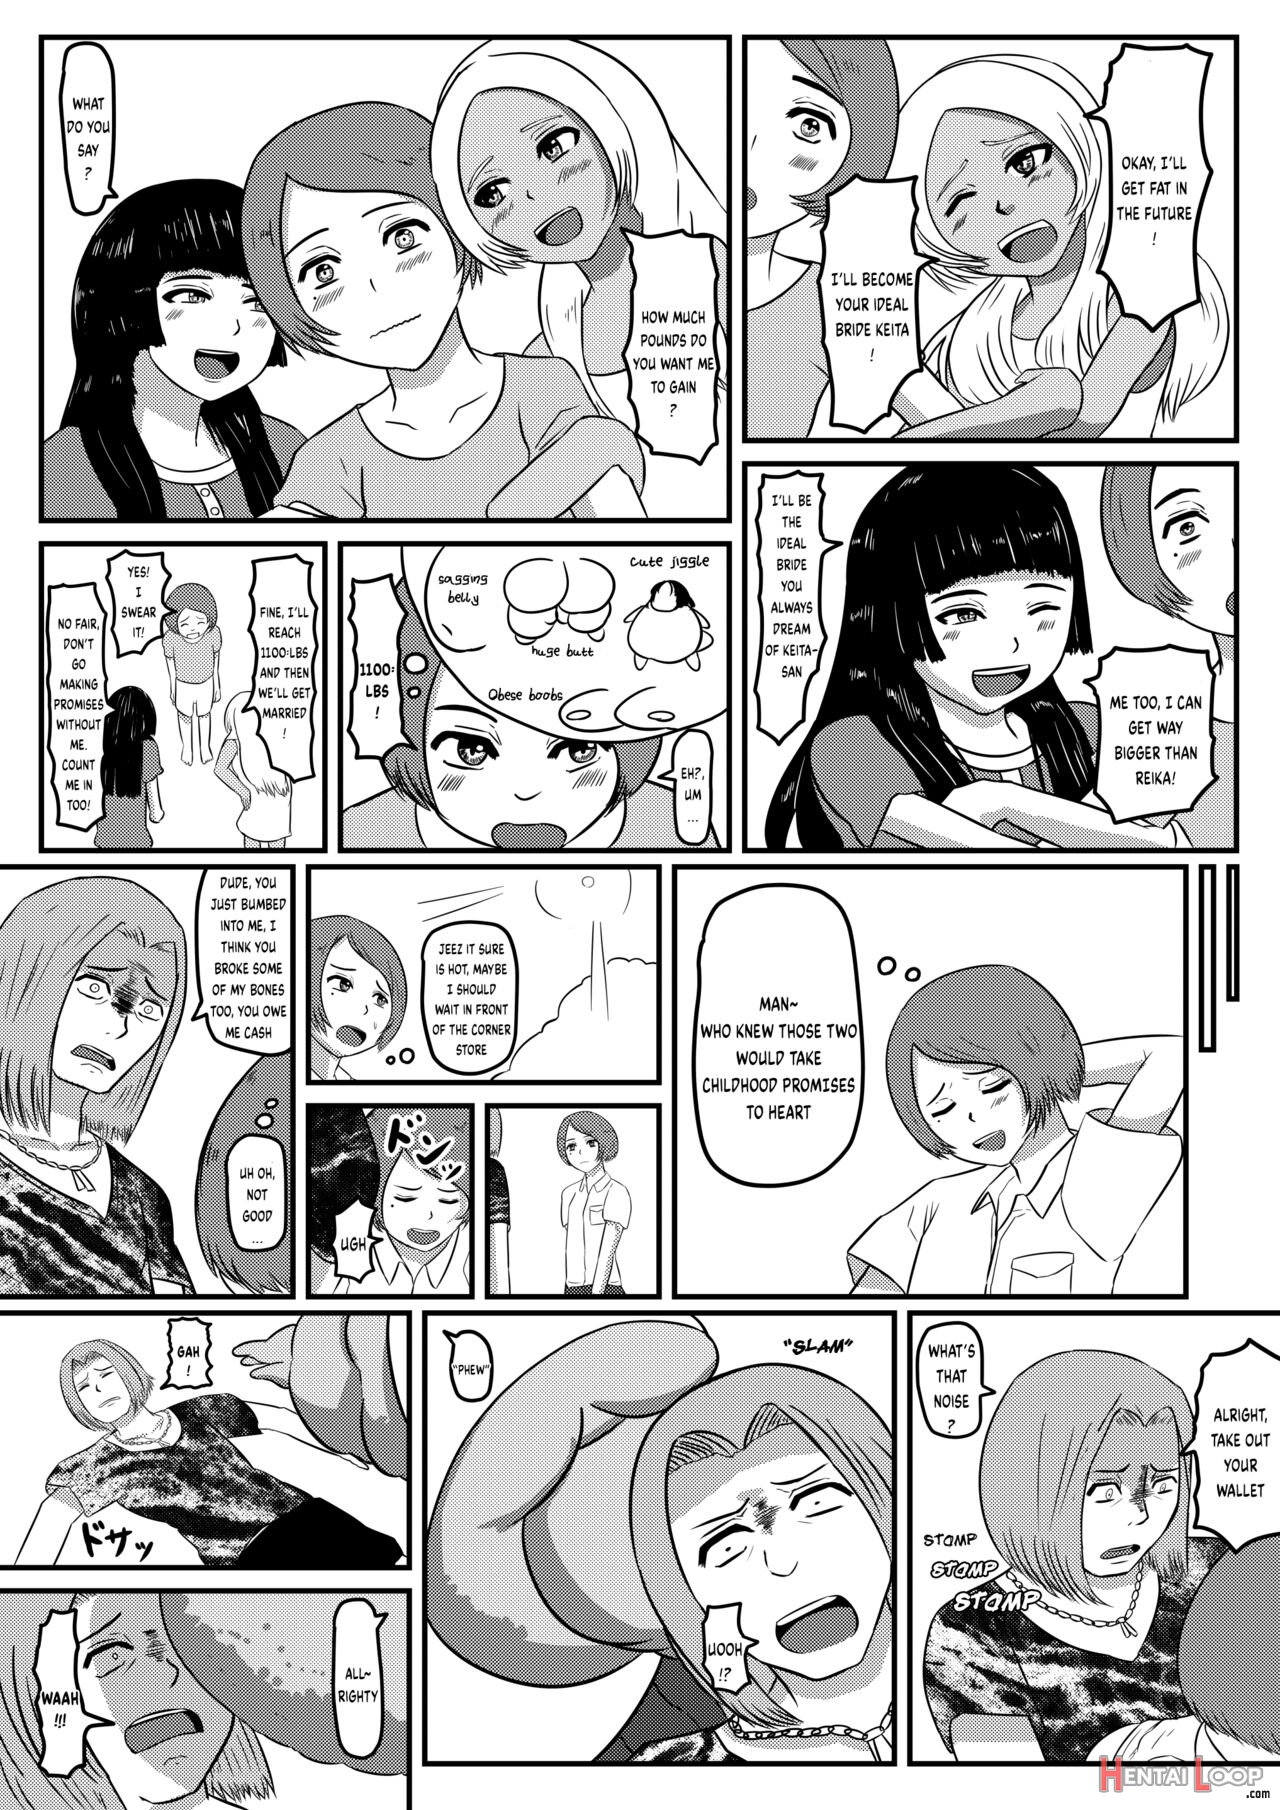 The Promise To Reach 1000lbs - English page 5